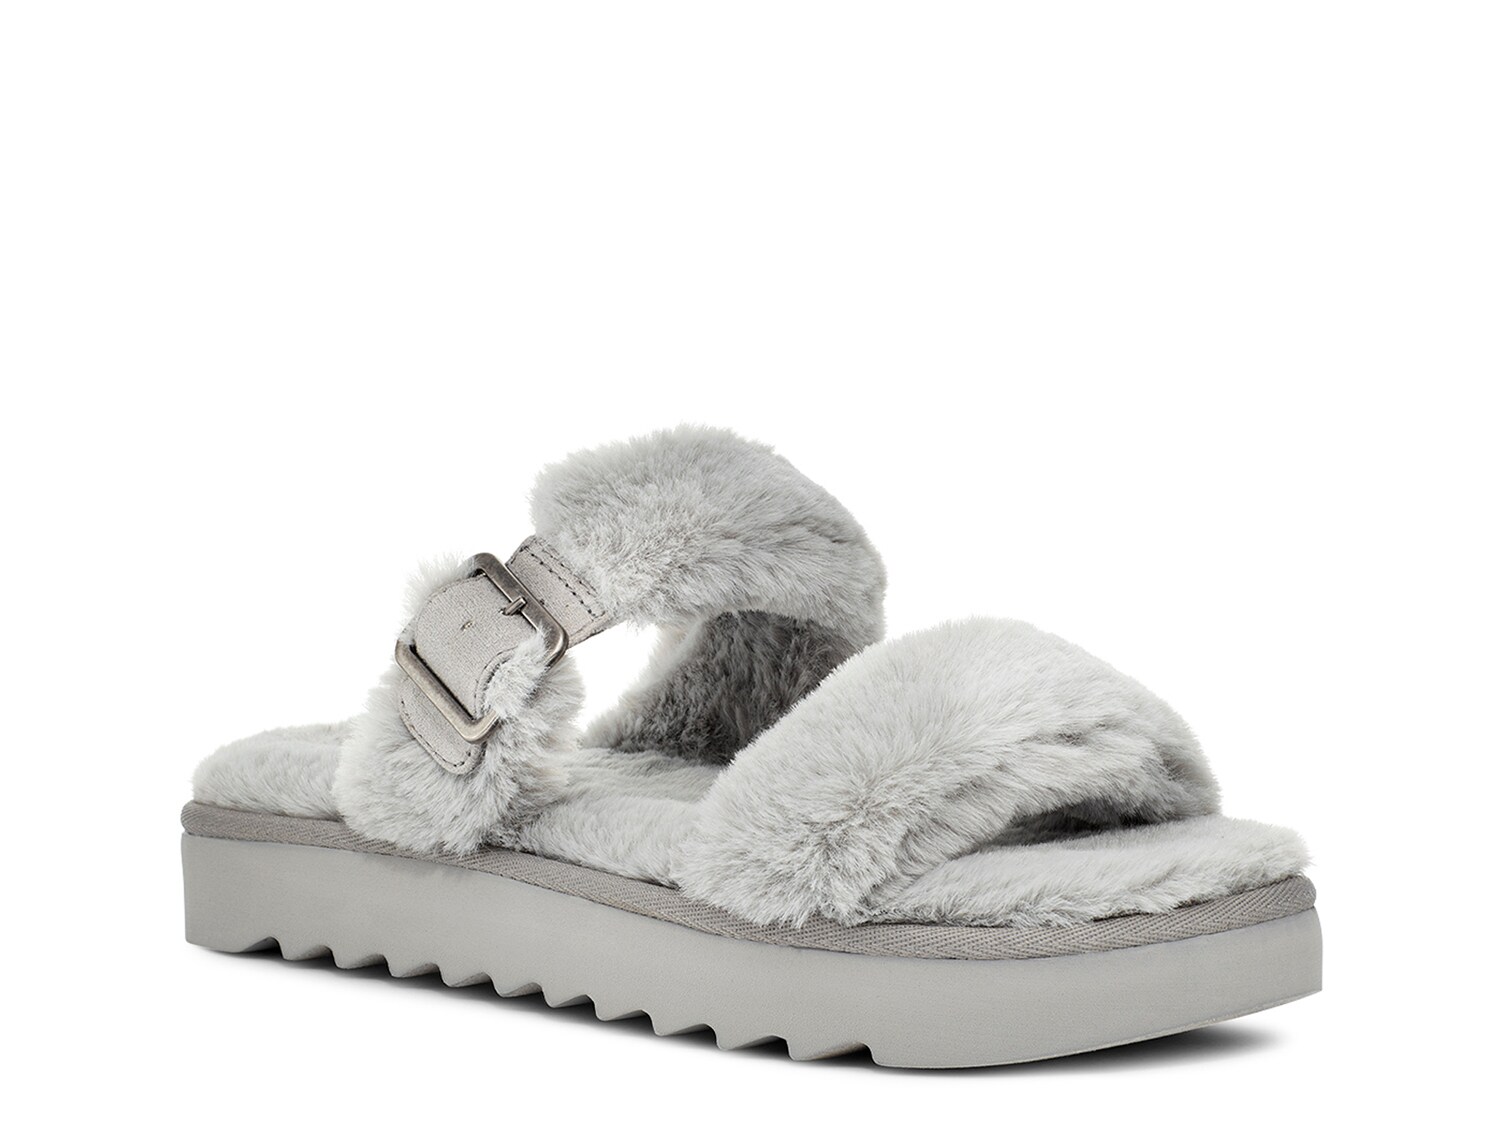 dsw shoes womens slippers